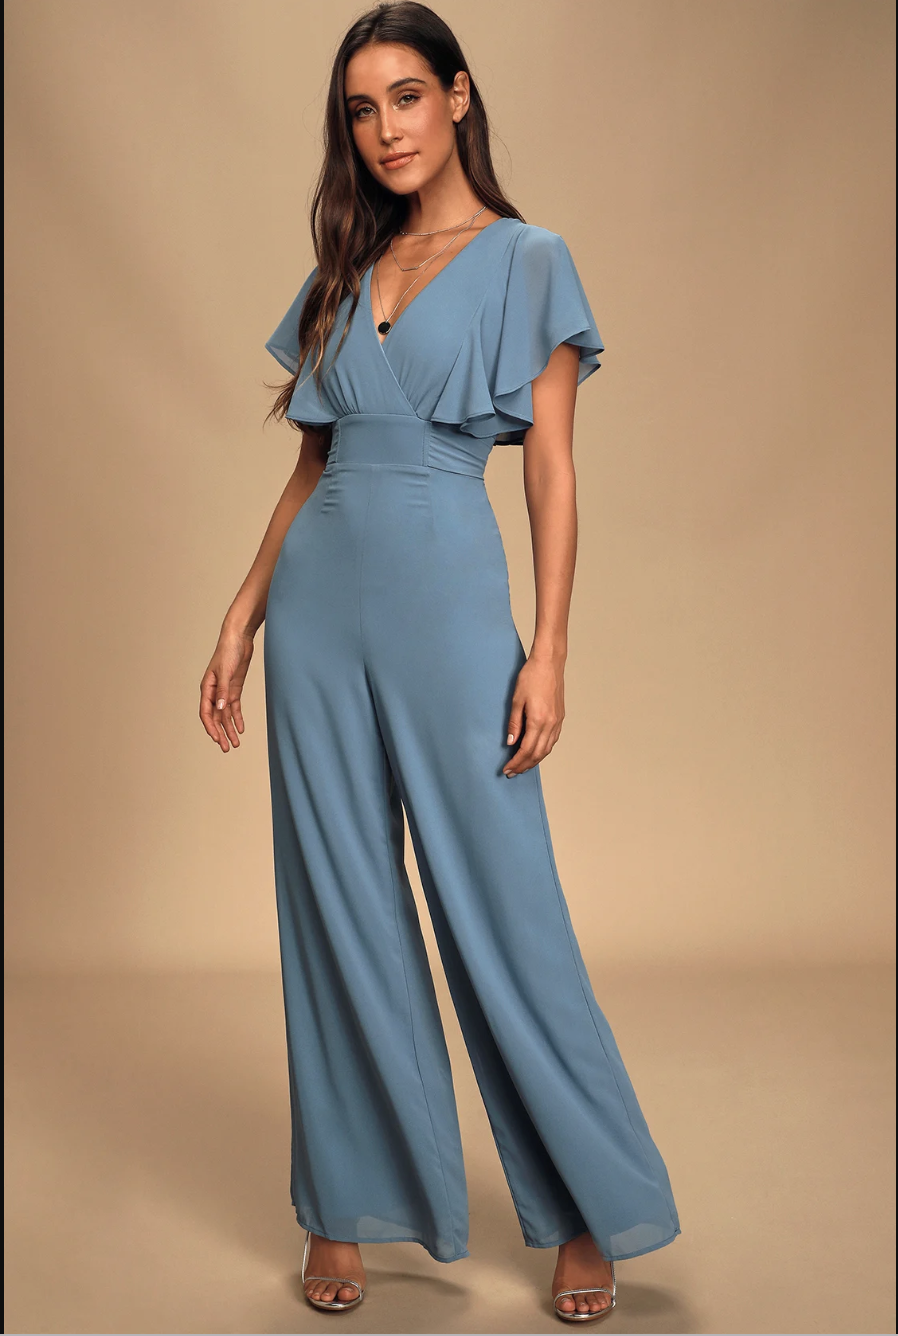 navy jumpsuits for wedding guest